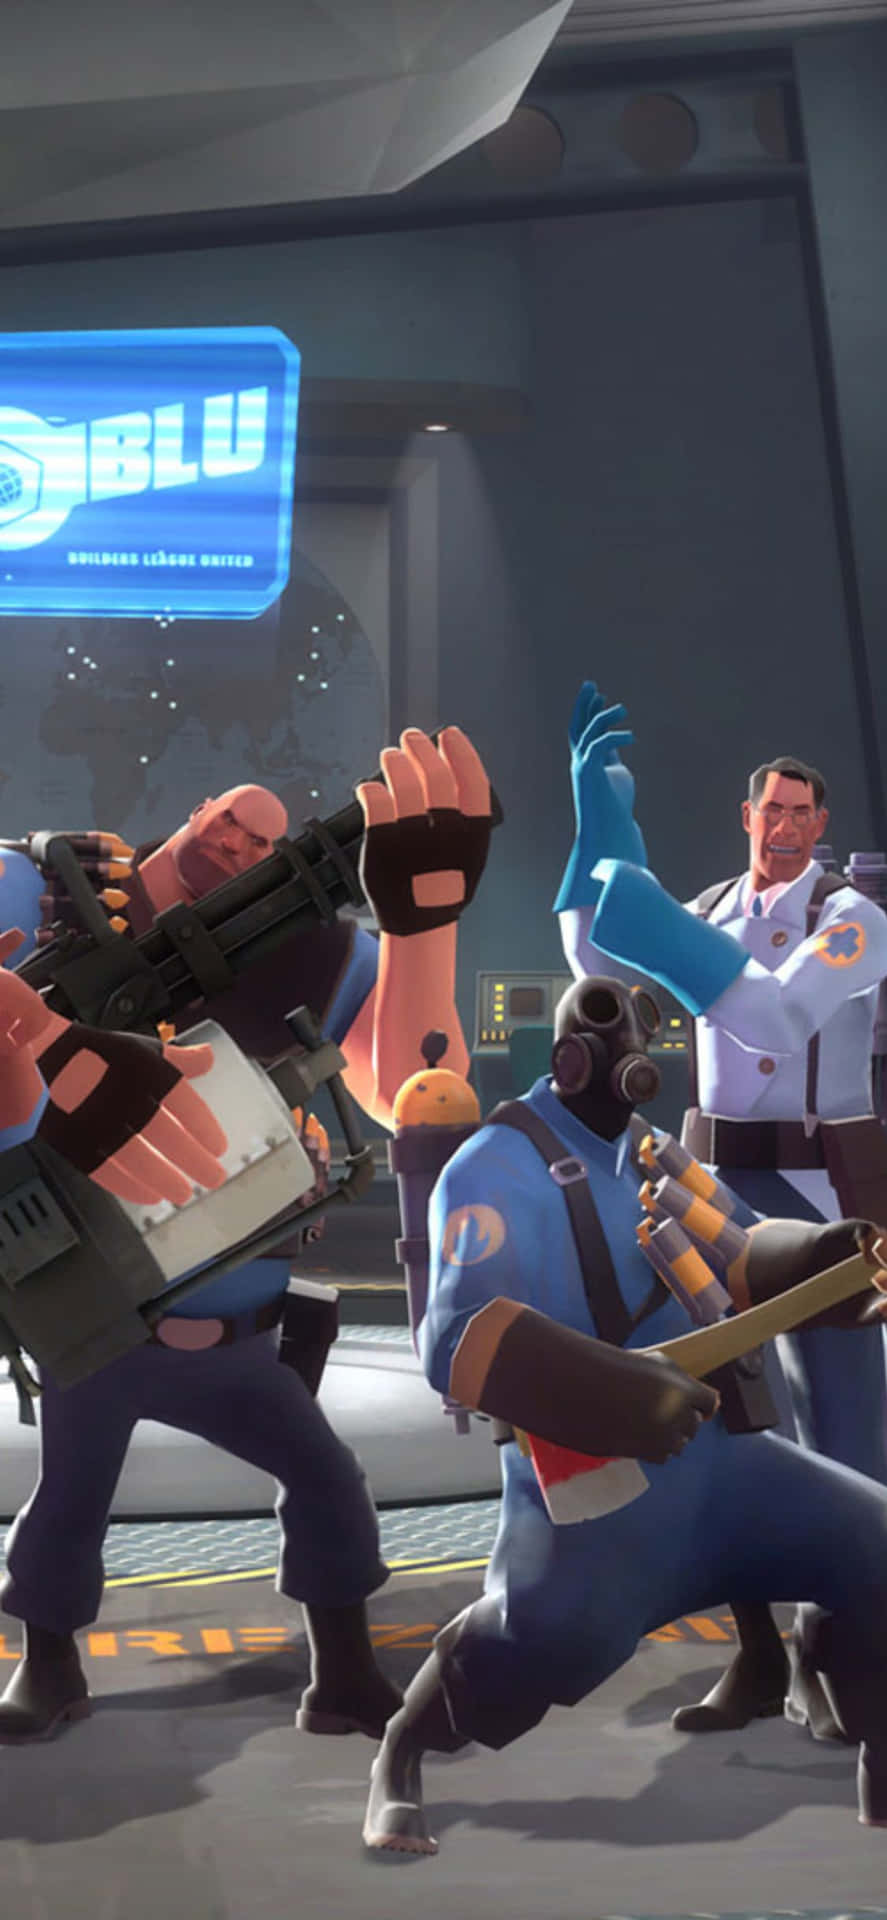 Iphone Xs Team Fortress 2 Baggrunde